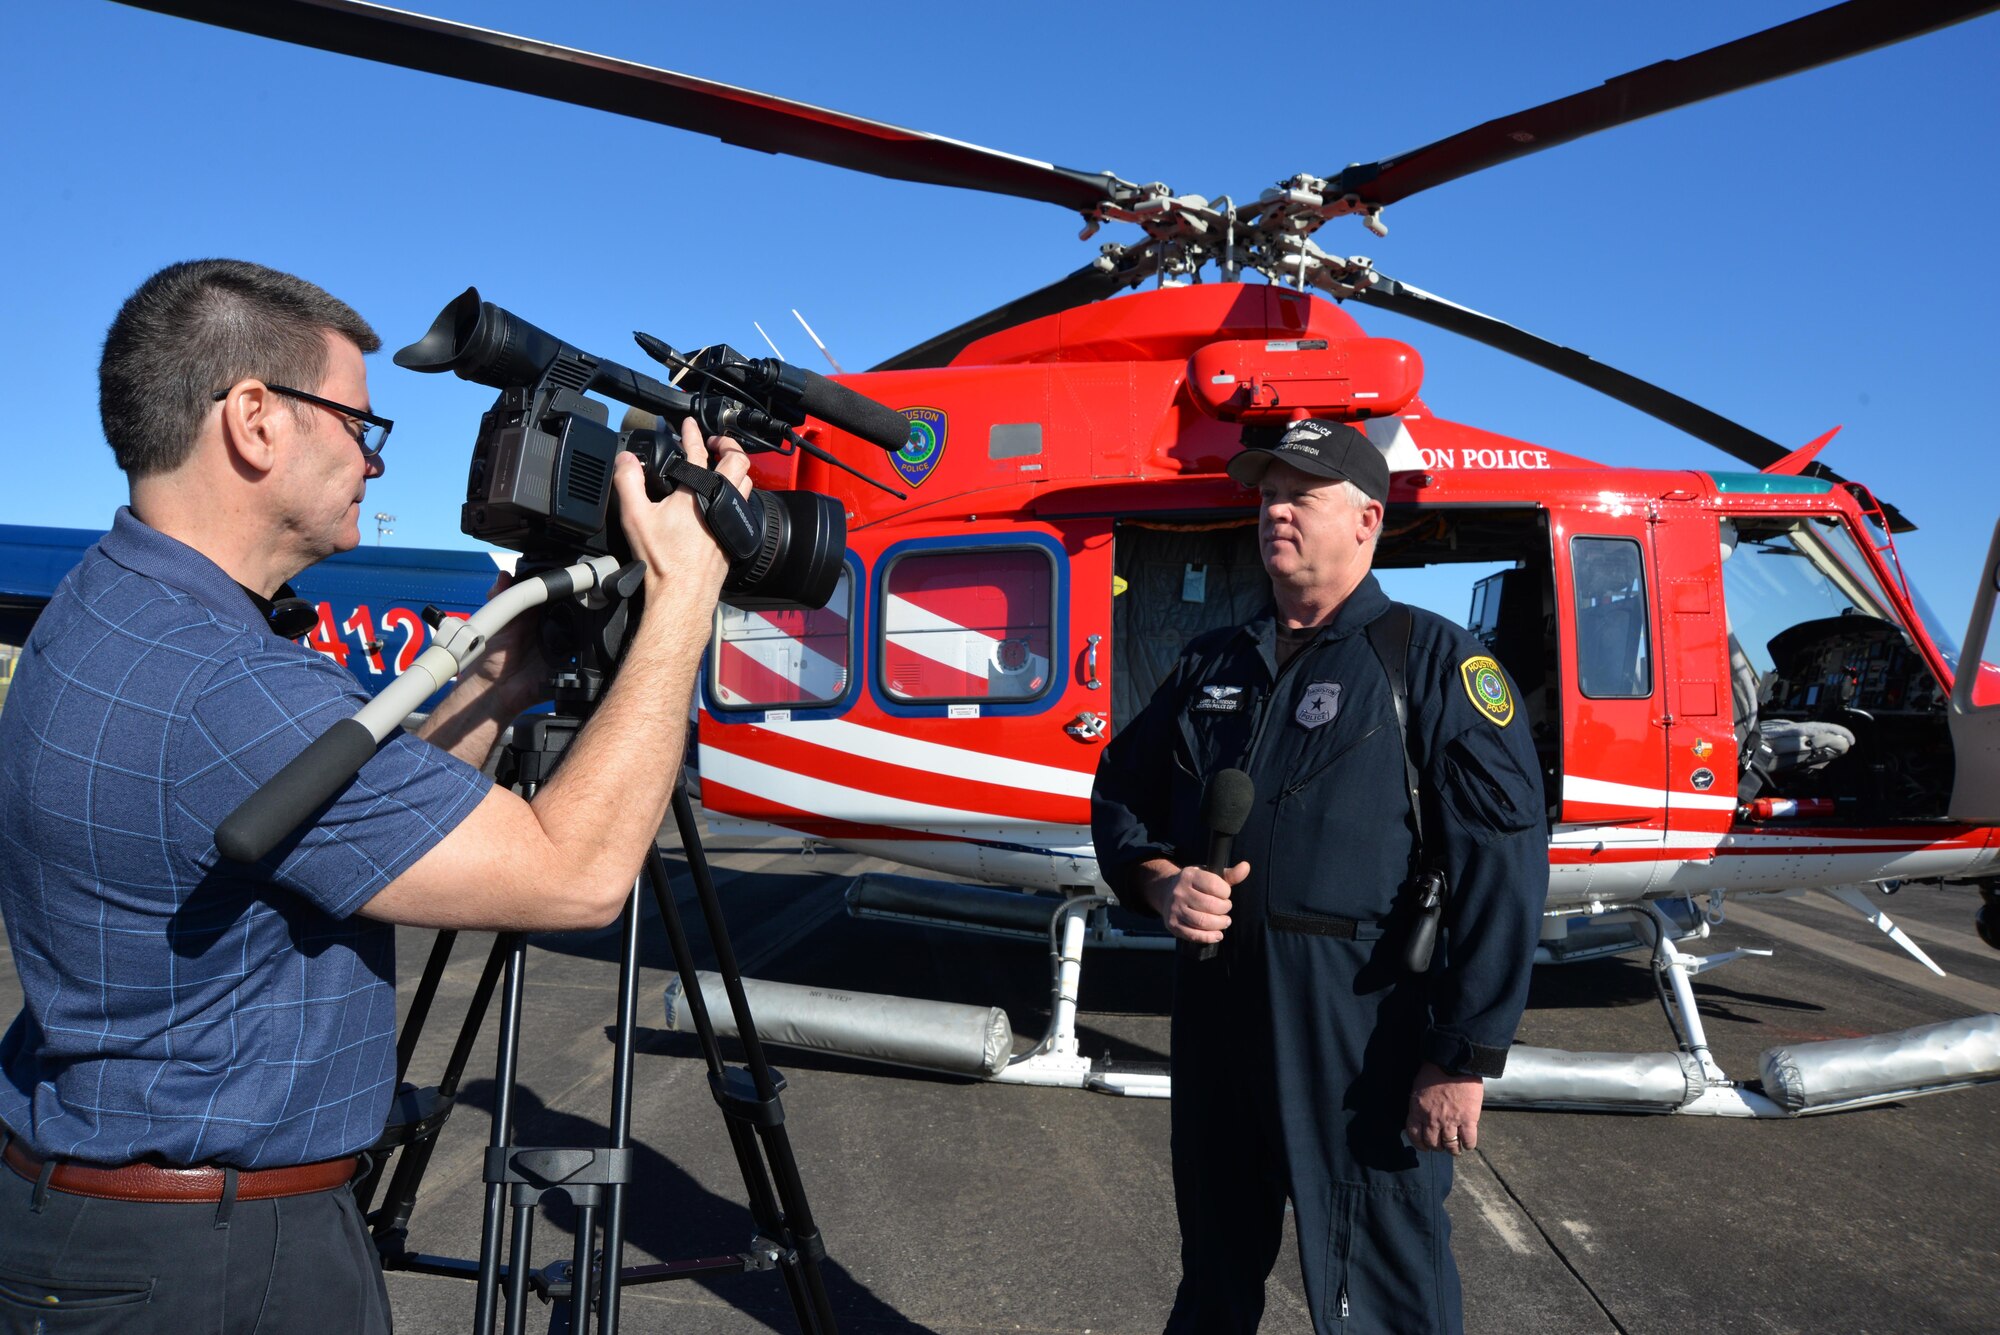 Louis Biehslich, 101st Air Communications Squadron videographer, films an interview with Larry Kroesche, chief pilot, Houston Police Department Air Operations, during a Super Bowl LI aerospace-security related media day Jan. 31 at Ellington Field Joint Reserve Base, Houston, Texas. As part of the media day, representatives from several agencies came together to speak about their roles in helping support air defense during Super Bowl LI Feb. 5. (Photo released by Mary McHale)